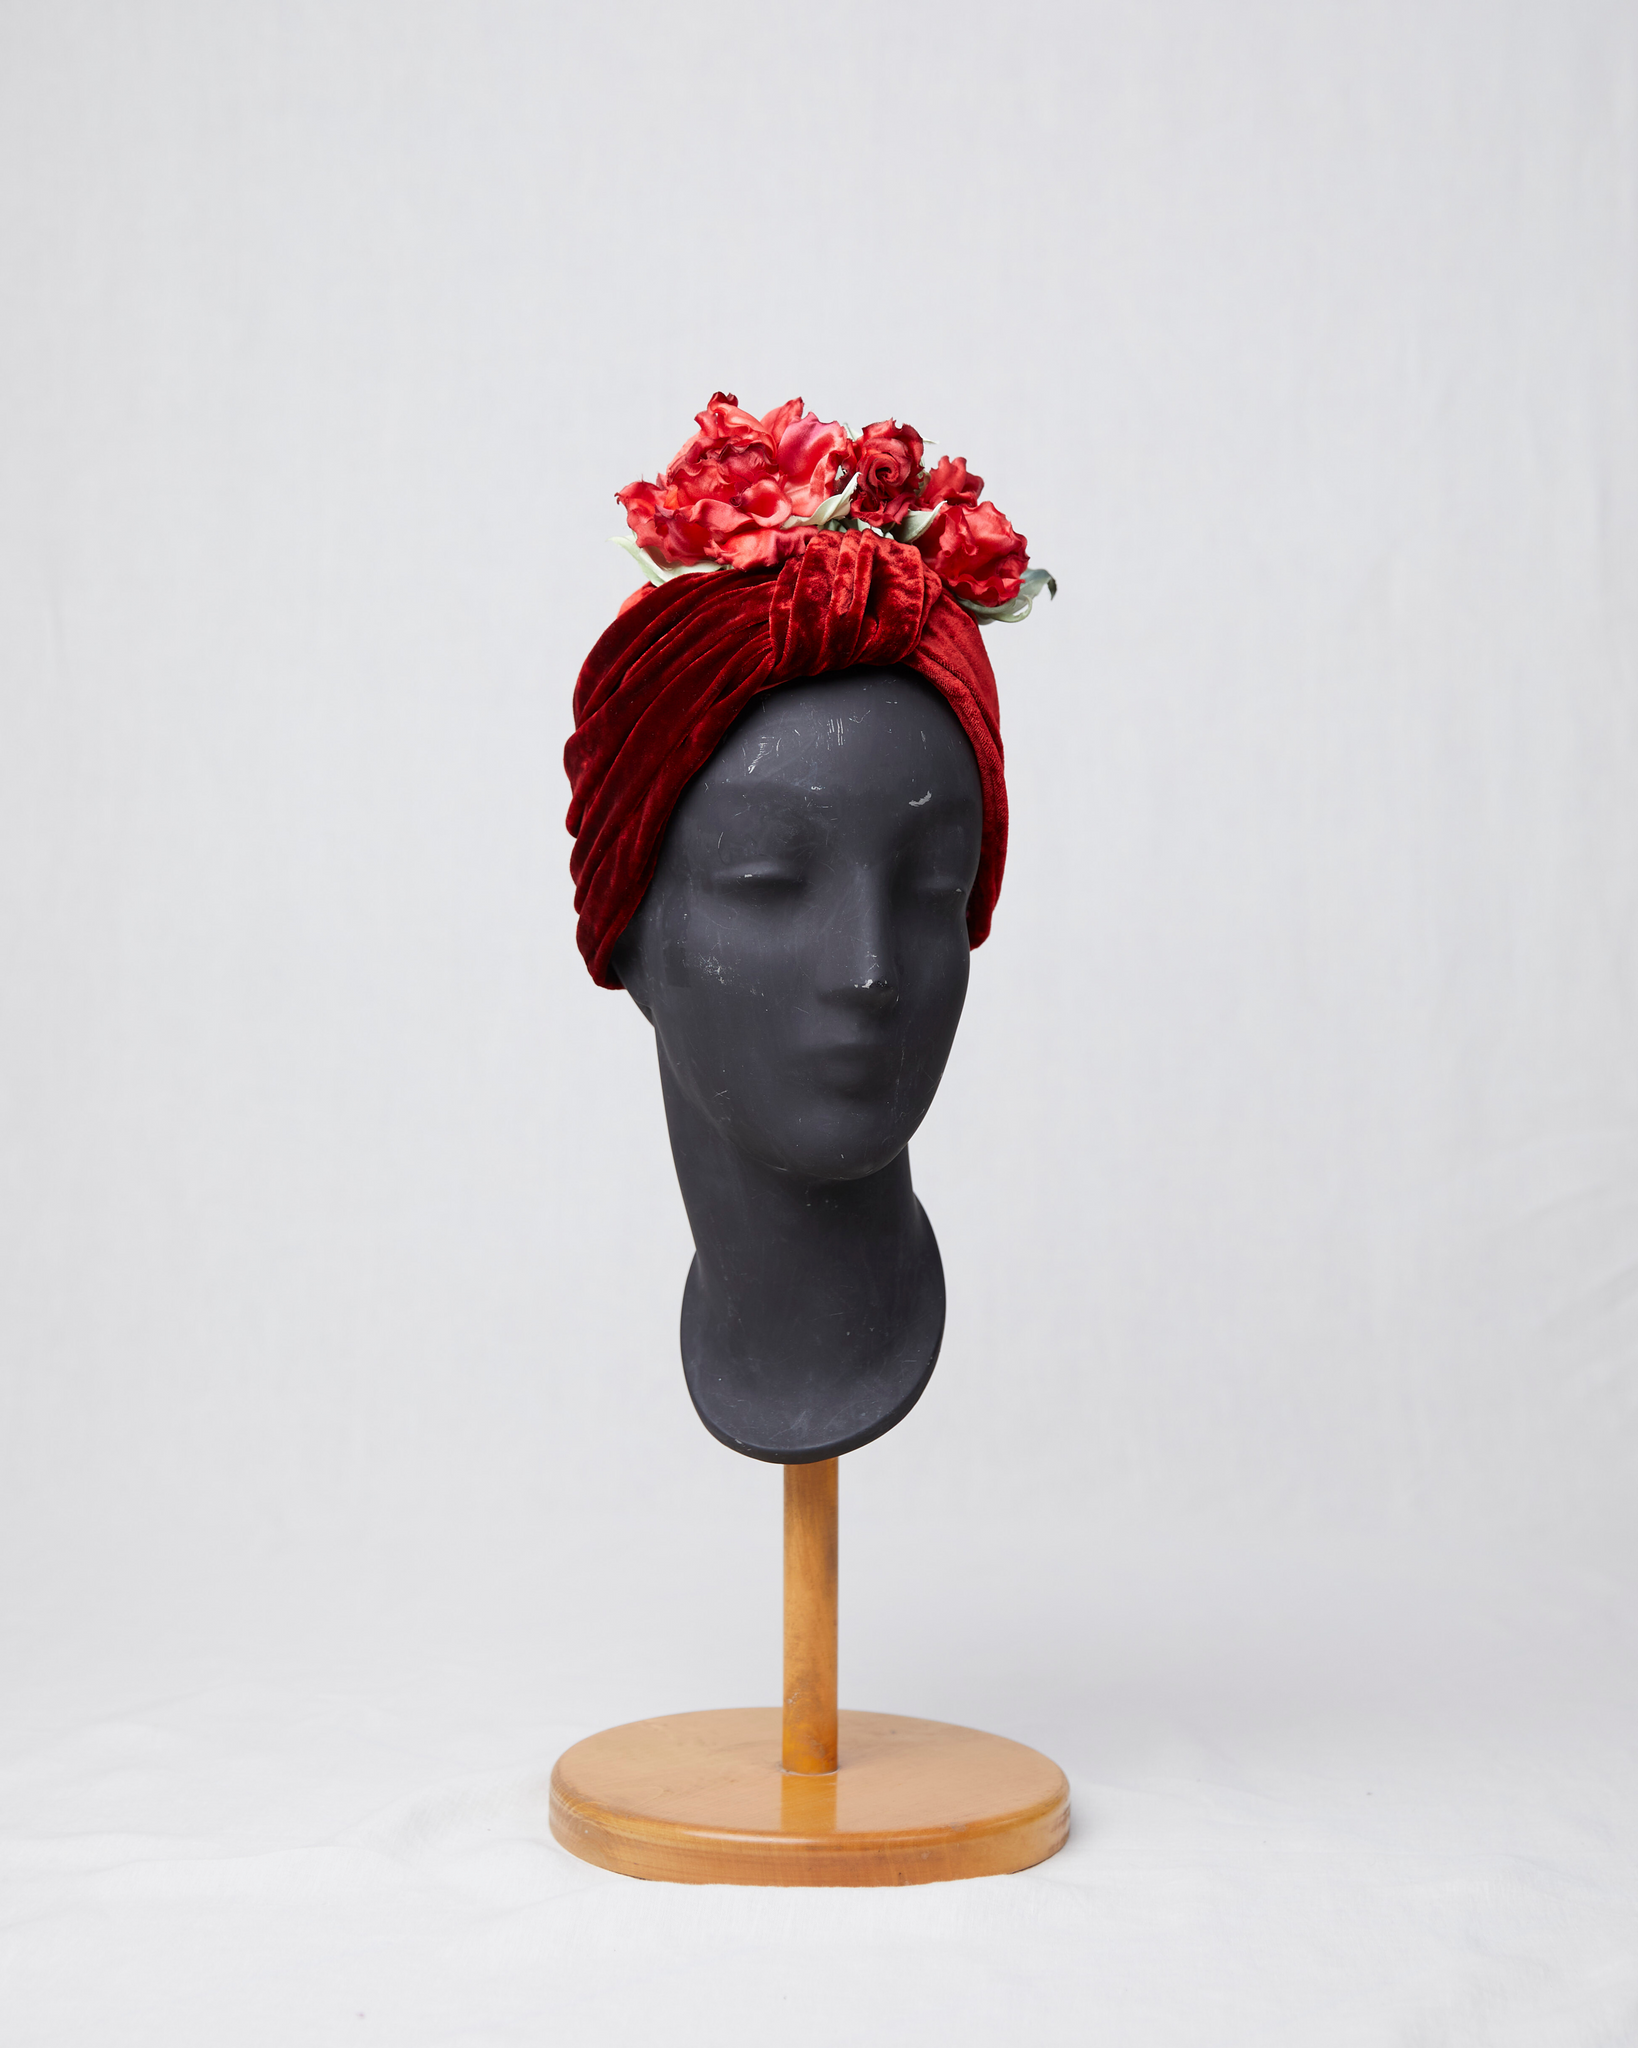 HEADQUARTER | couture headwear Haute couture turban, made of silk velvet, trimmed with hand-crafted silk flowers. Unique piece. Designed and handcrafted in Switzerland.